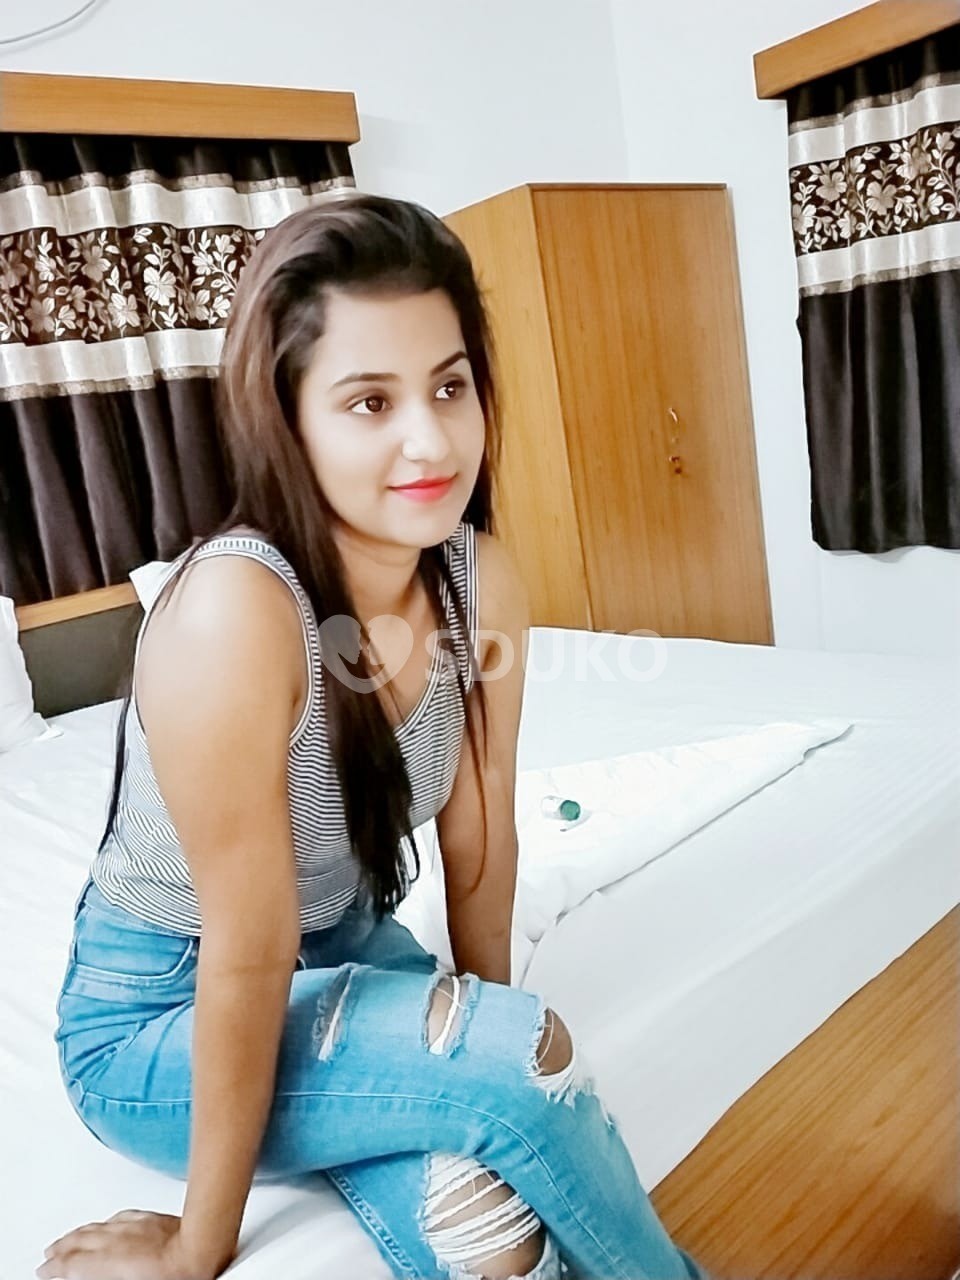 Bharuch ✔️☎️ 7690,08,8313 DIRECT CALL MEMYSELF CHARVI CALL GIRL & BODY-2-BODY MASSAGE SPA SERVICES OUTCALL INCAL